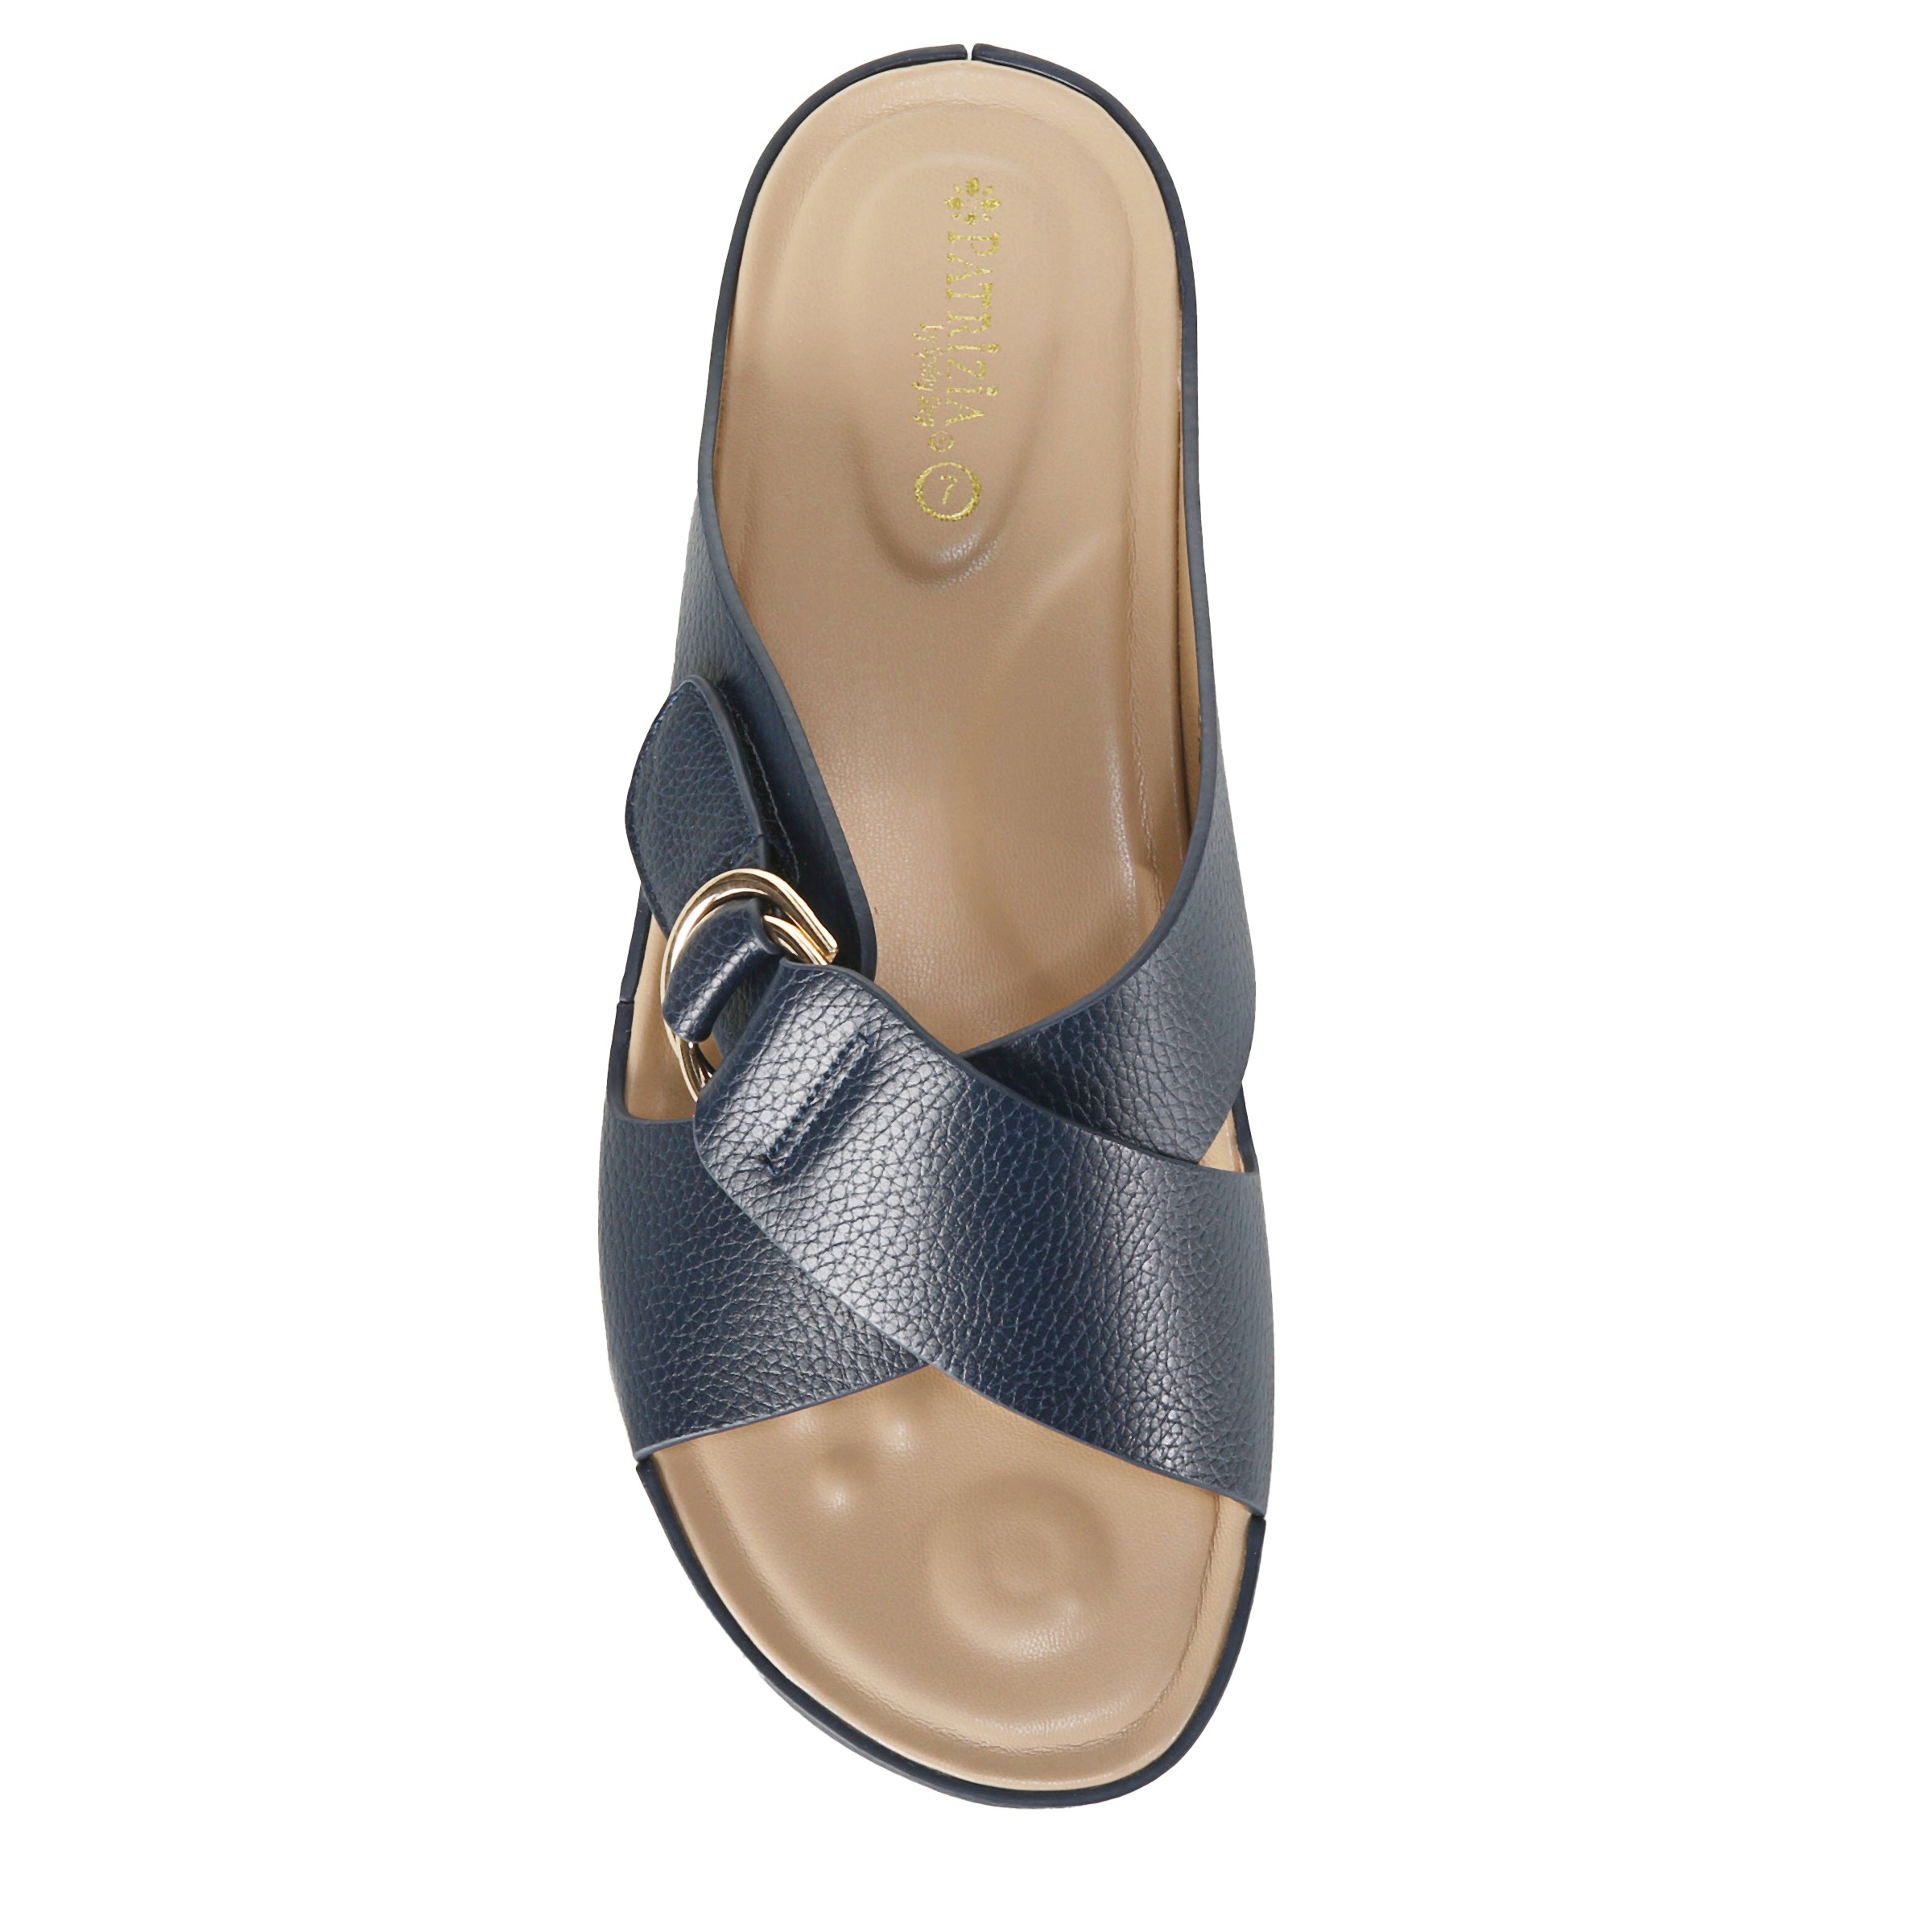 Climax Sandals (@climaxsandals) • Instagram photos and videos